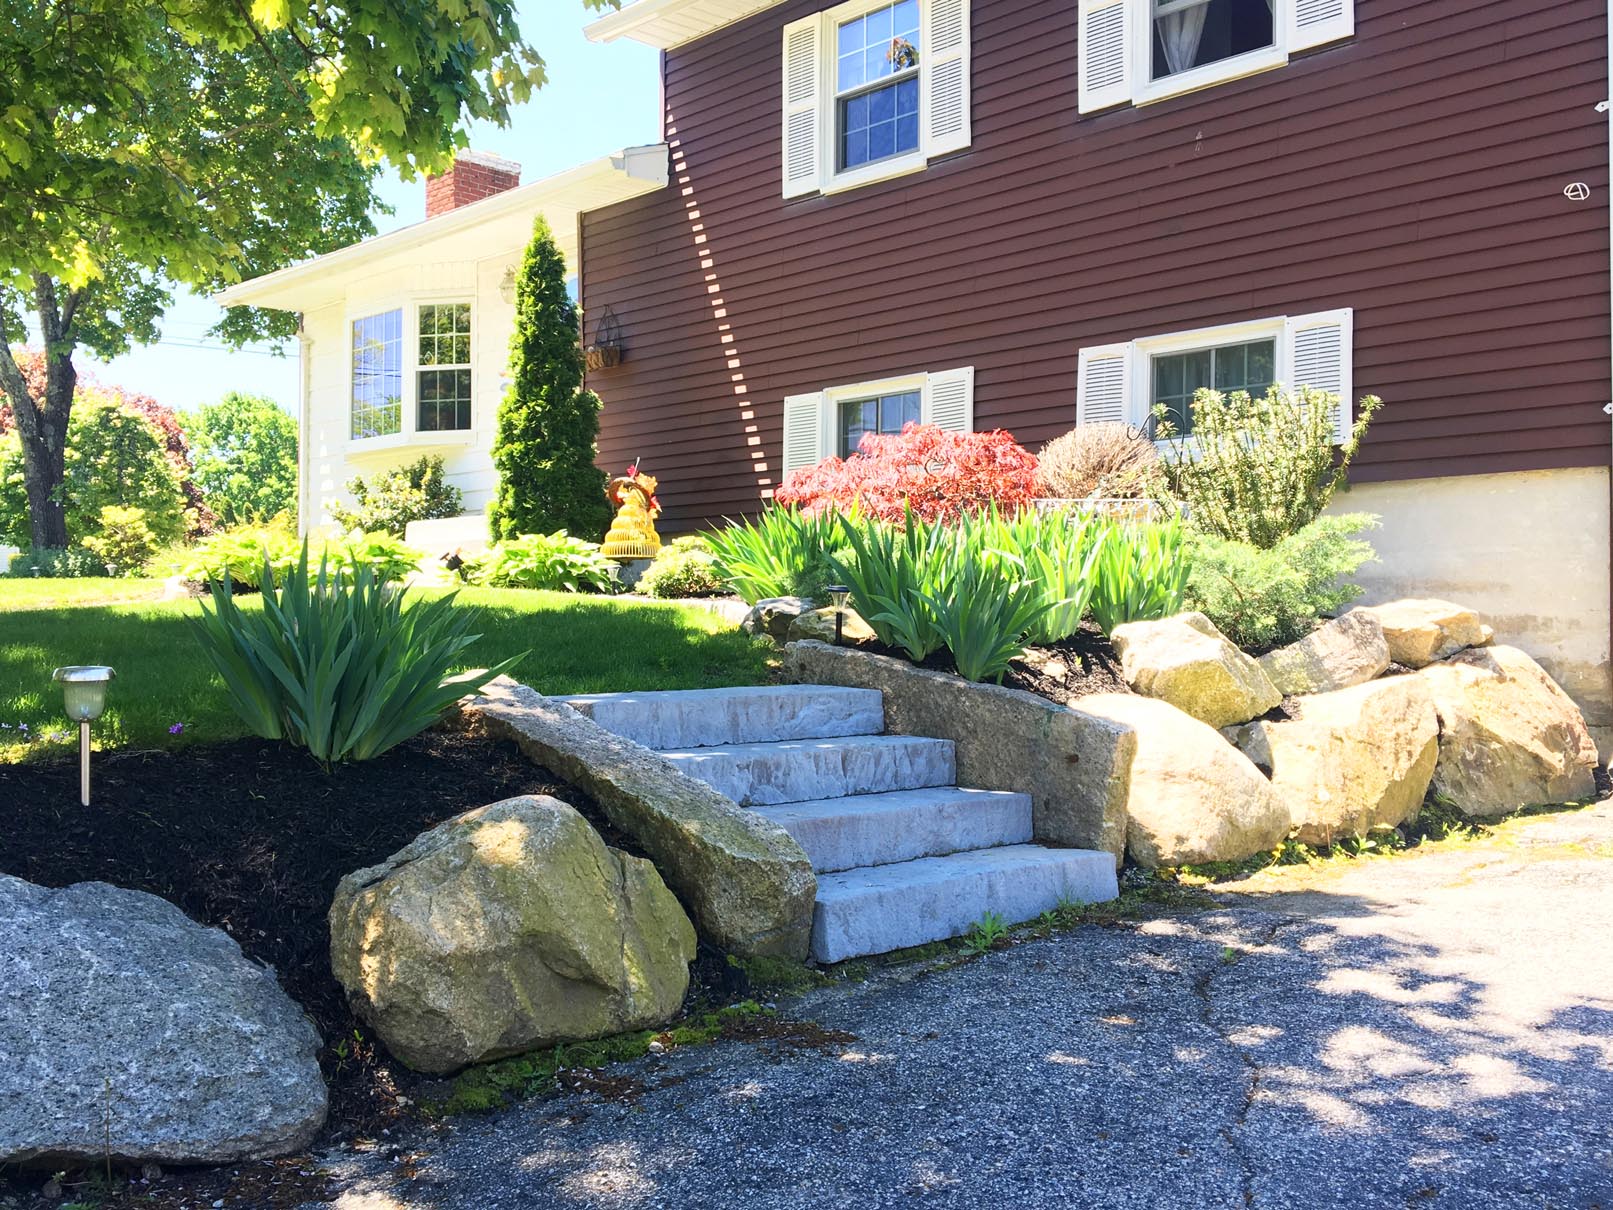 Steps and Stones